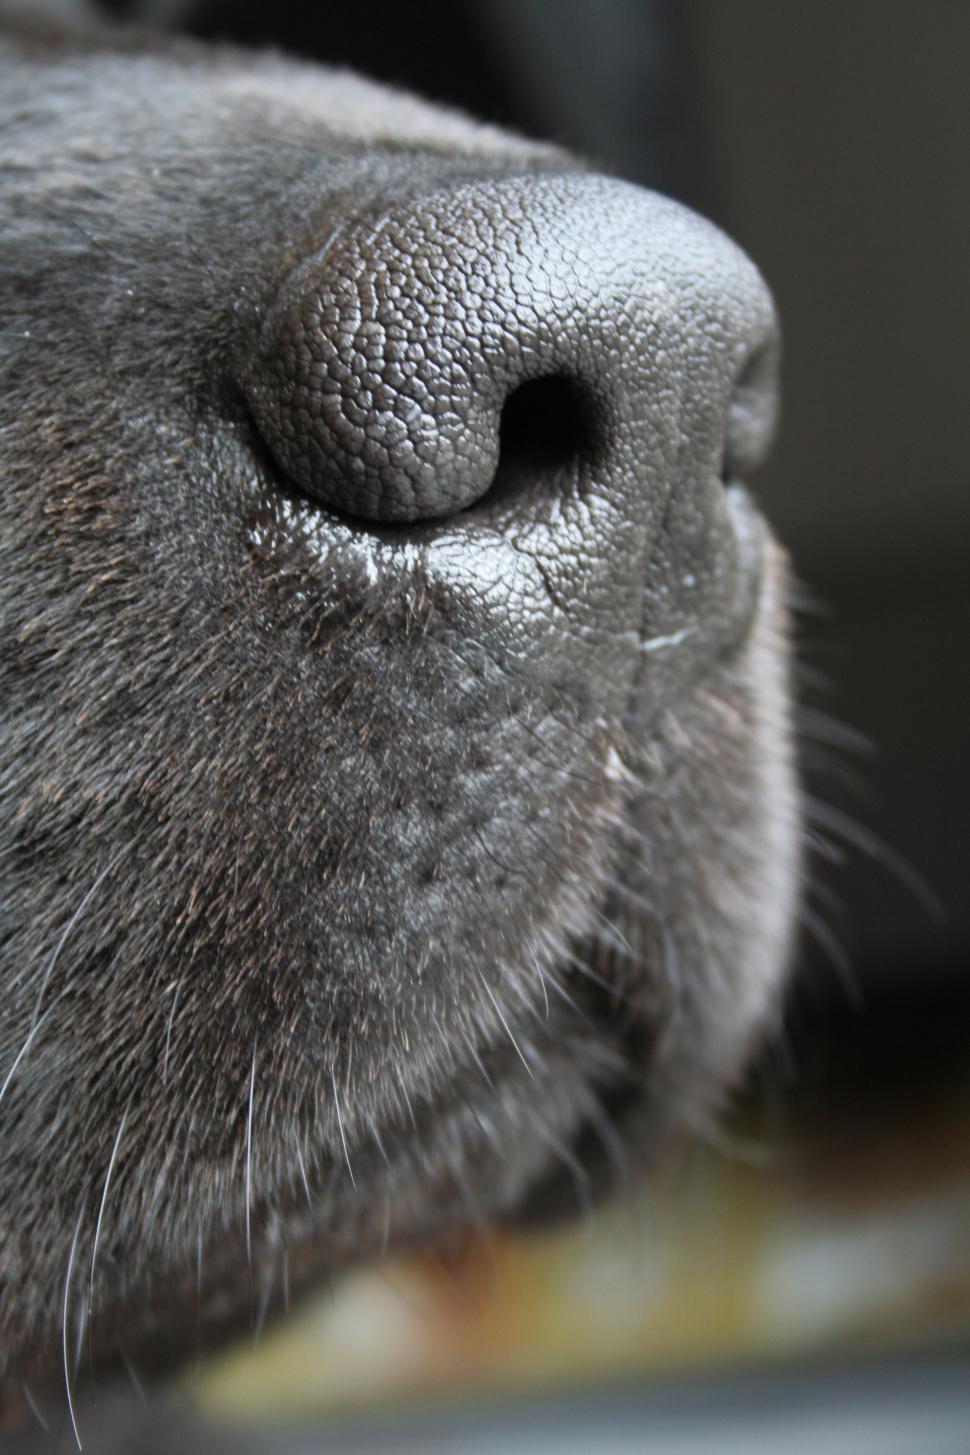 Free Image of Dog Snout 